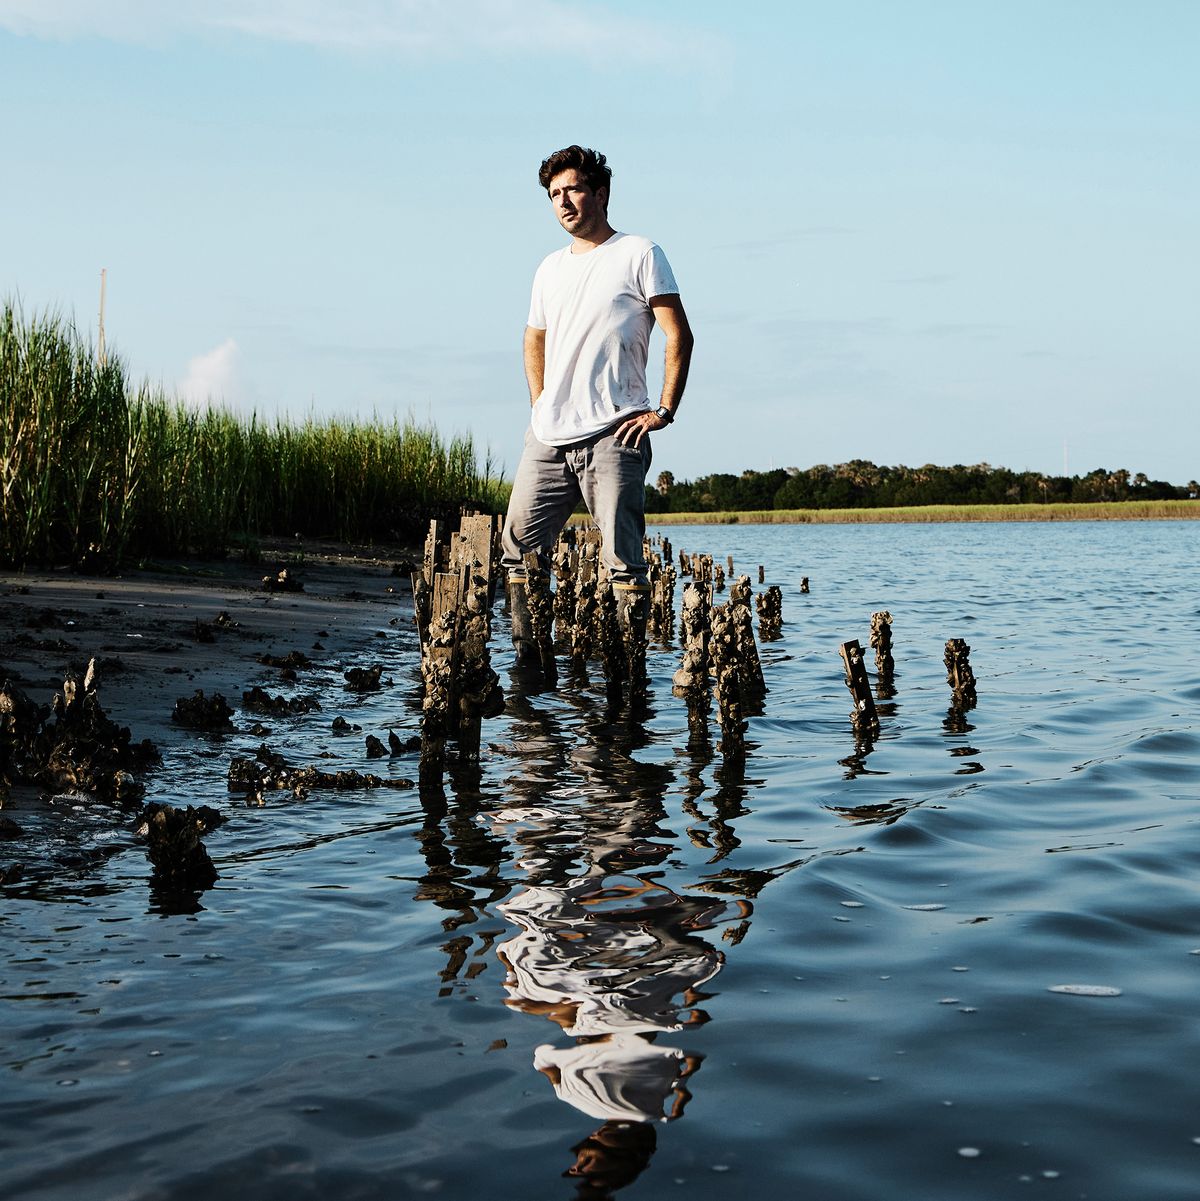 cyrus buffam, breach inlet, isle of palms, sc the oysterman gives a tour of his oyster beds and harvesting area